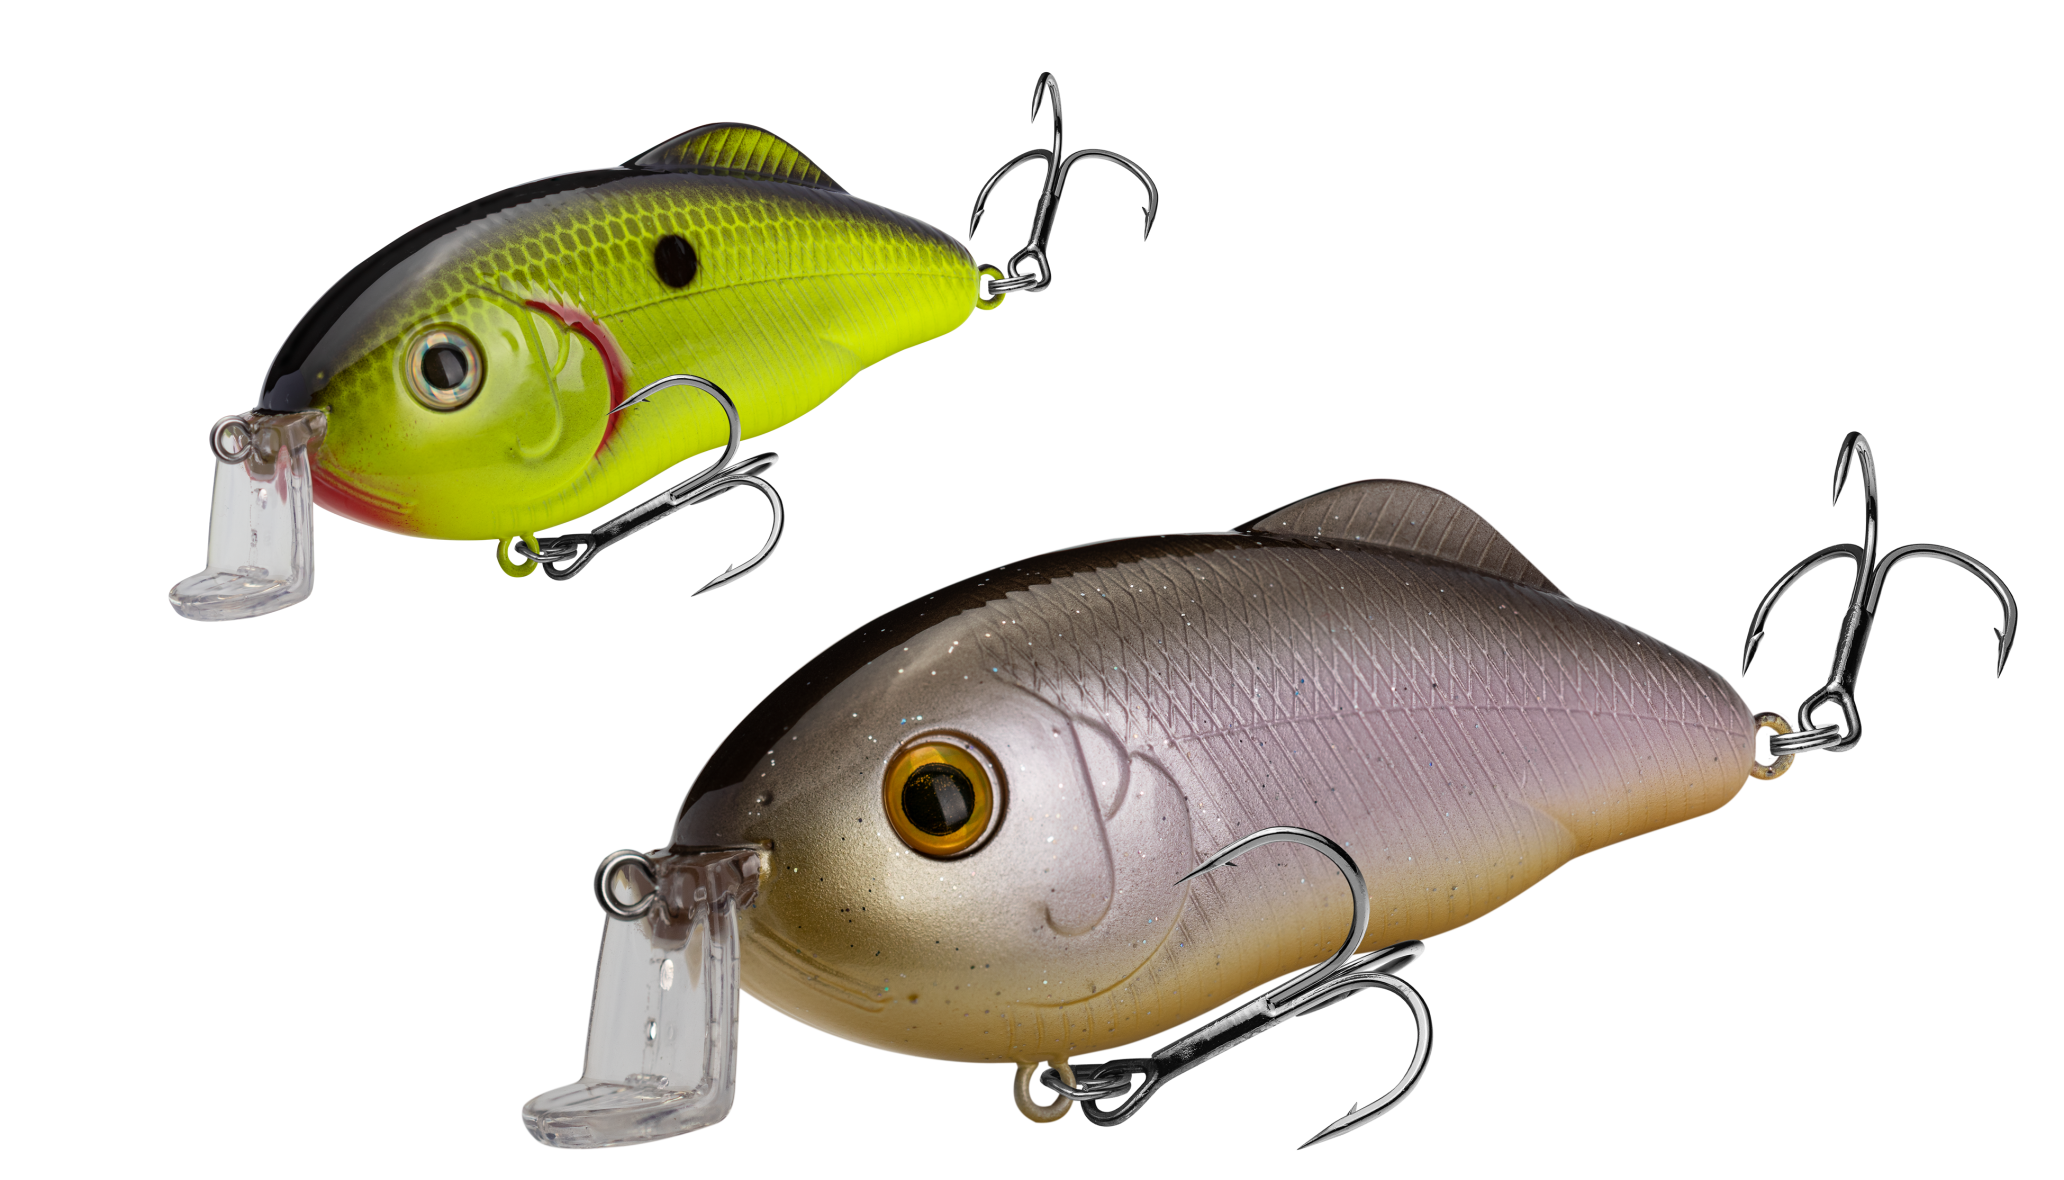 Strike King Launches Two New Lures to the Hybrid Hunter Line-up